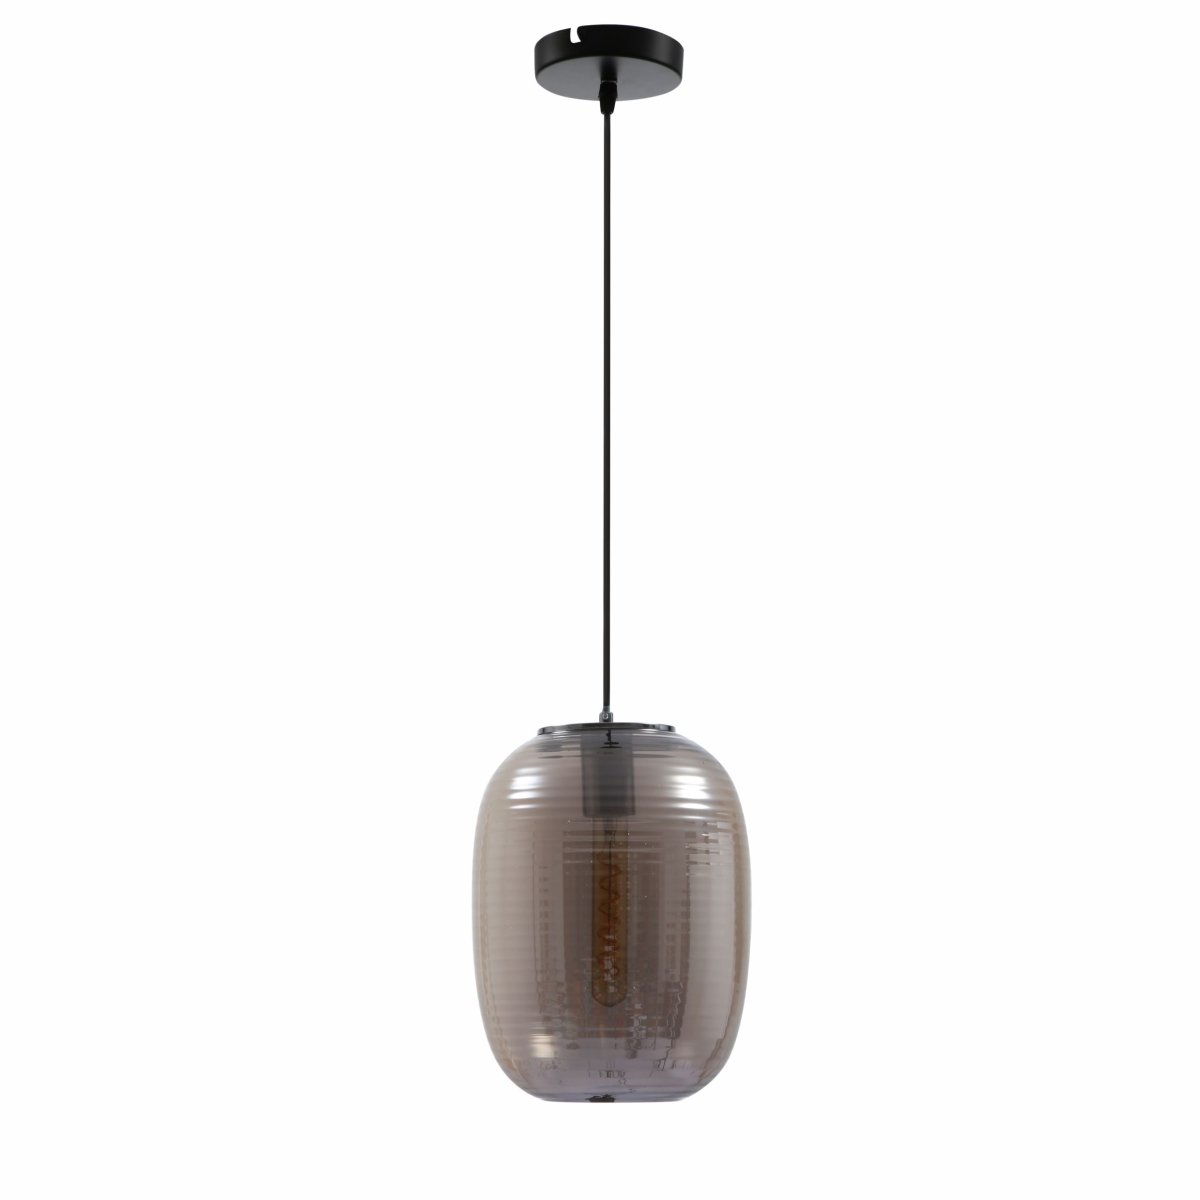 Main image of Bee Hive Smoky Glass Pendant Light with E27 Fitting | TEKLED 159-17346